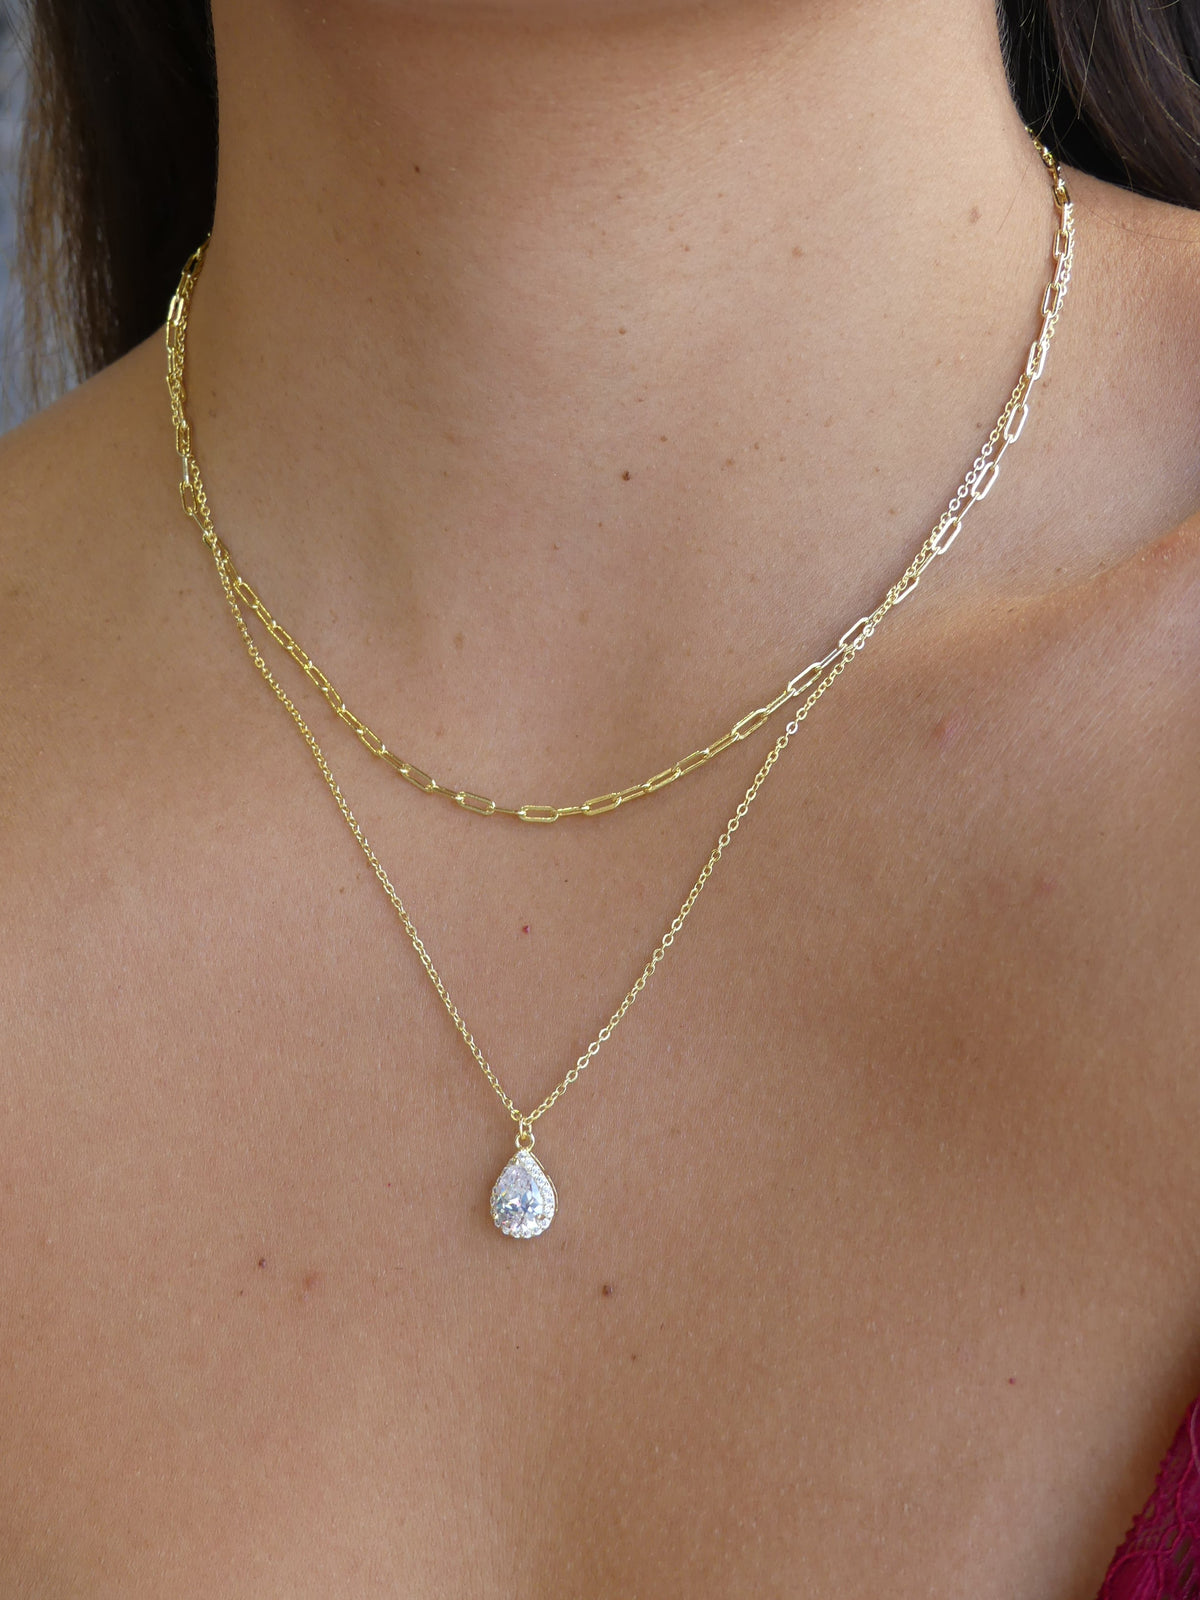 Double necklace, layering ideas-gold necklaces, dainty, gift ideas popular trending christmas gift ideas for mom or girlfriend or best friend trending necklaces instagram reels and tiktok waterproof Miami Kesley Boutique 